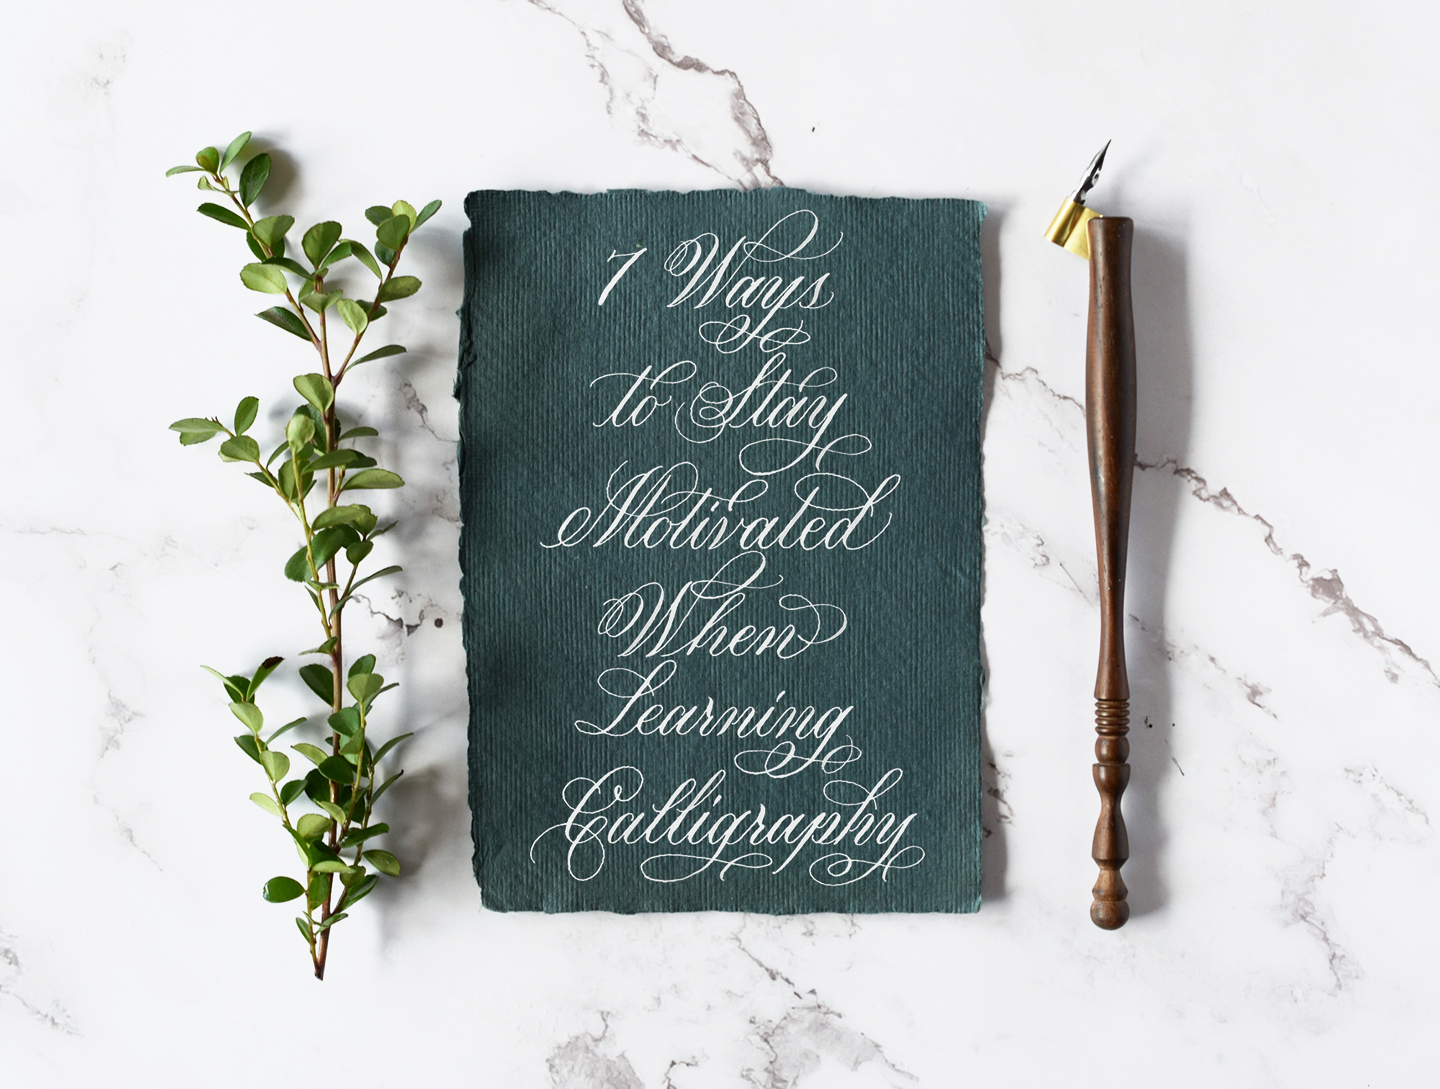 7 Ways to Stay Motivated When Learning Calligraphy